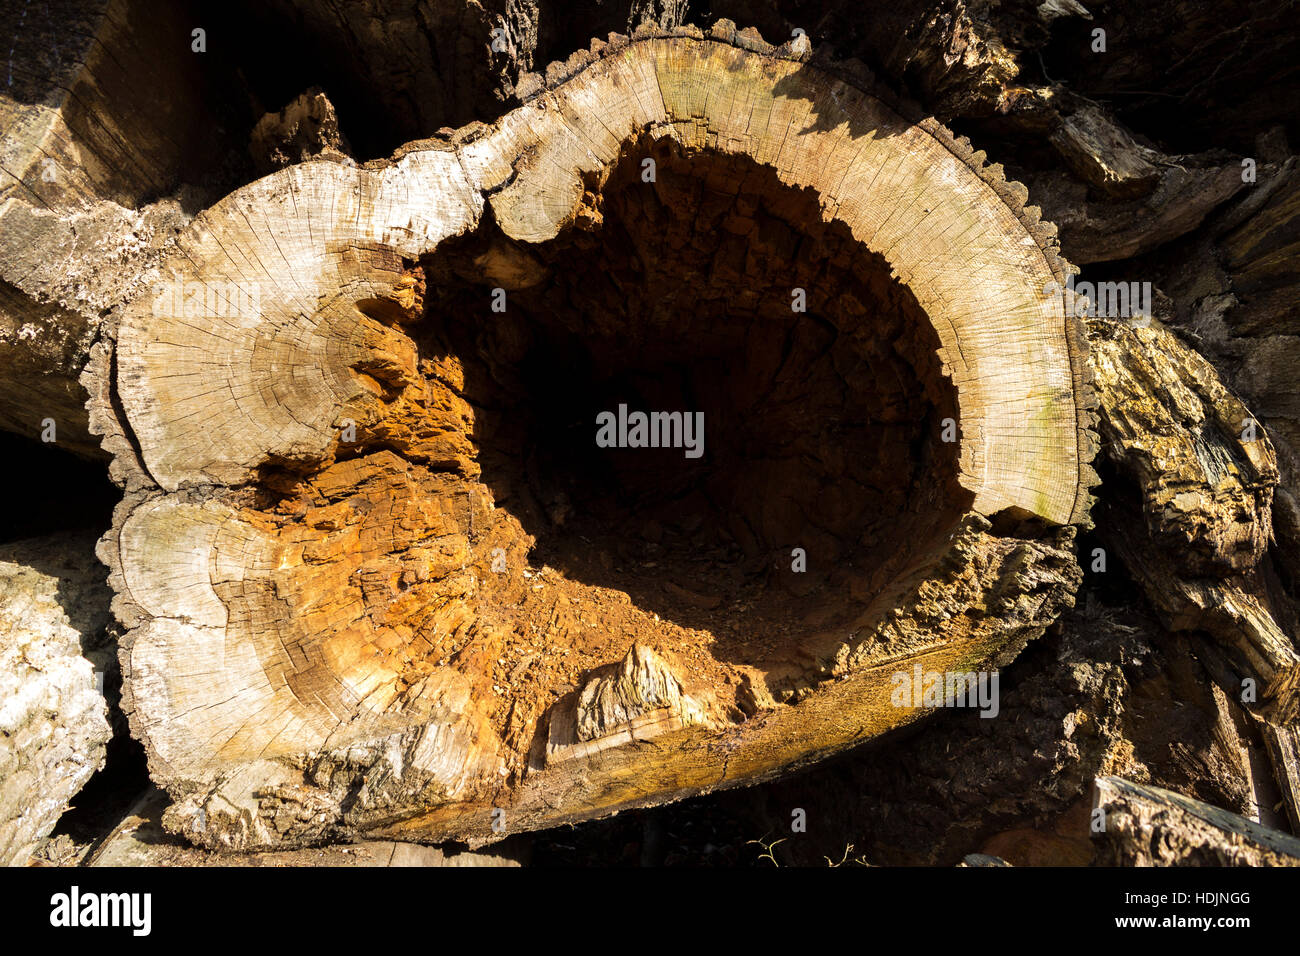 A decaying tree trunk in a stack of trees Stock Photo